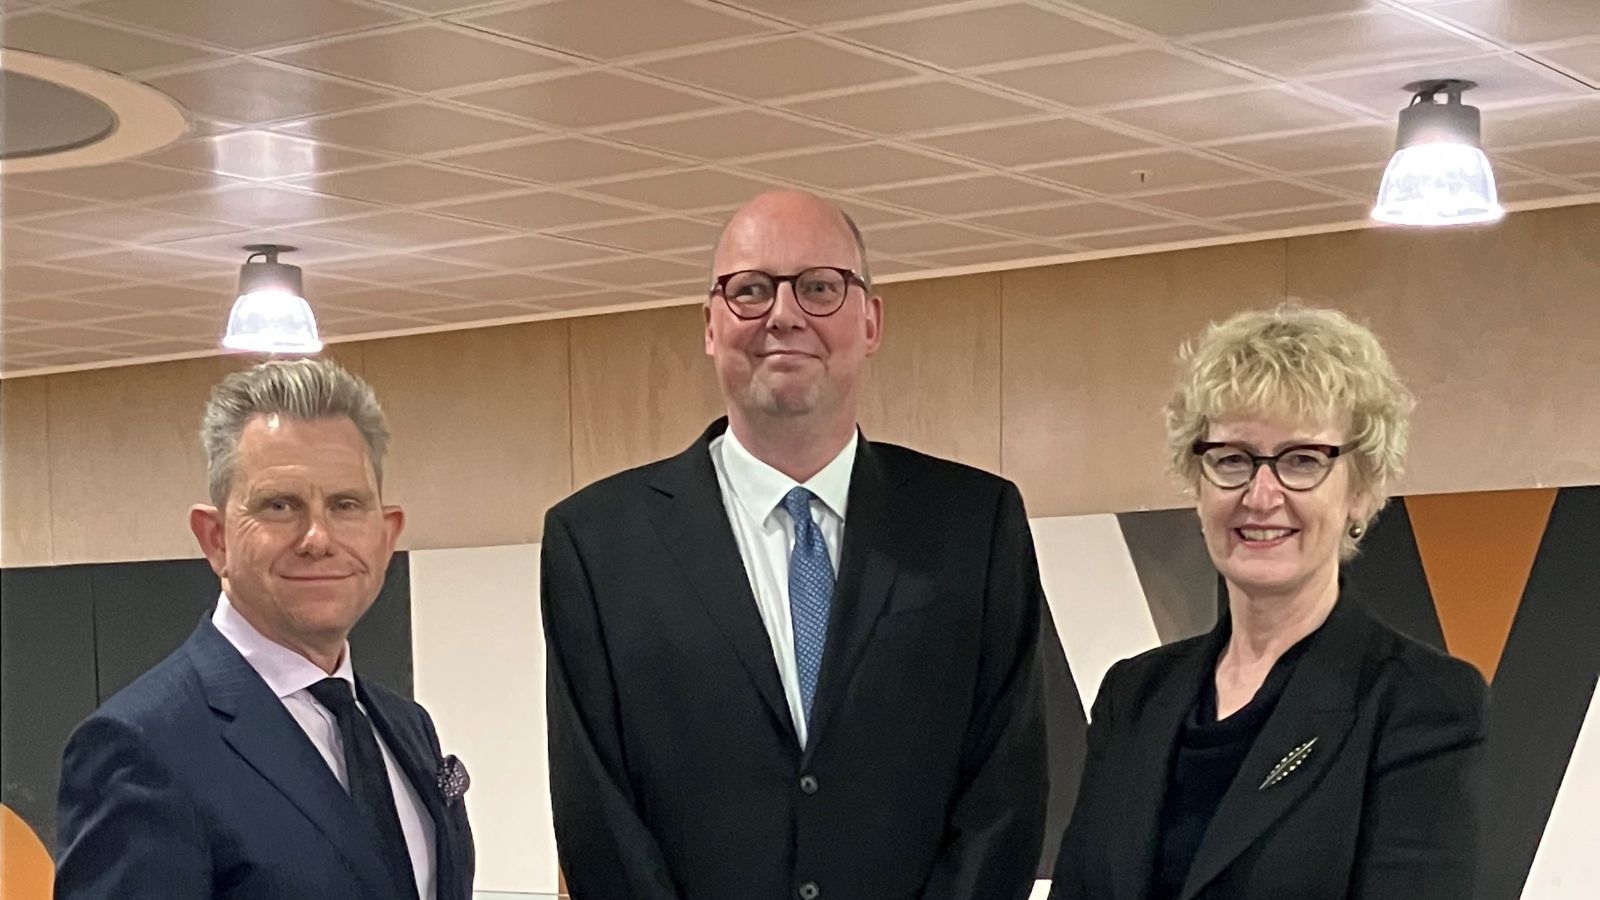 Professor Karl Lofgren, flanked by two other staff members, at his inaugural lecture